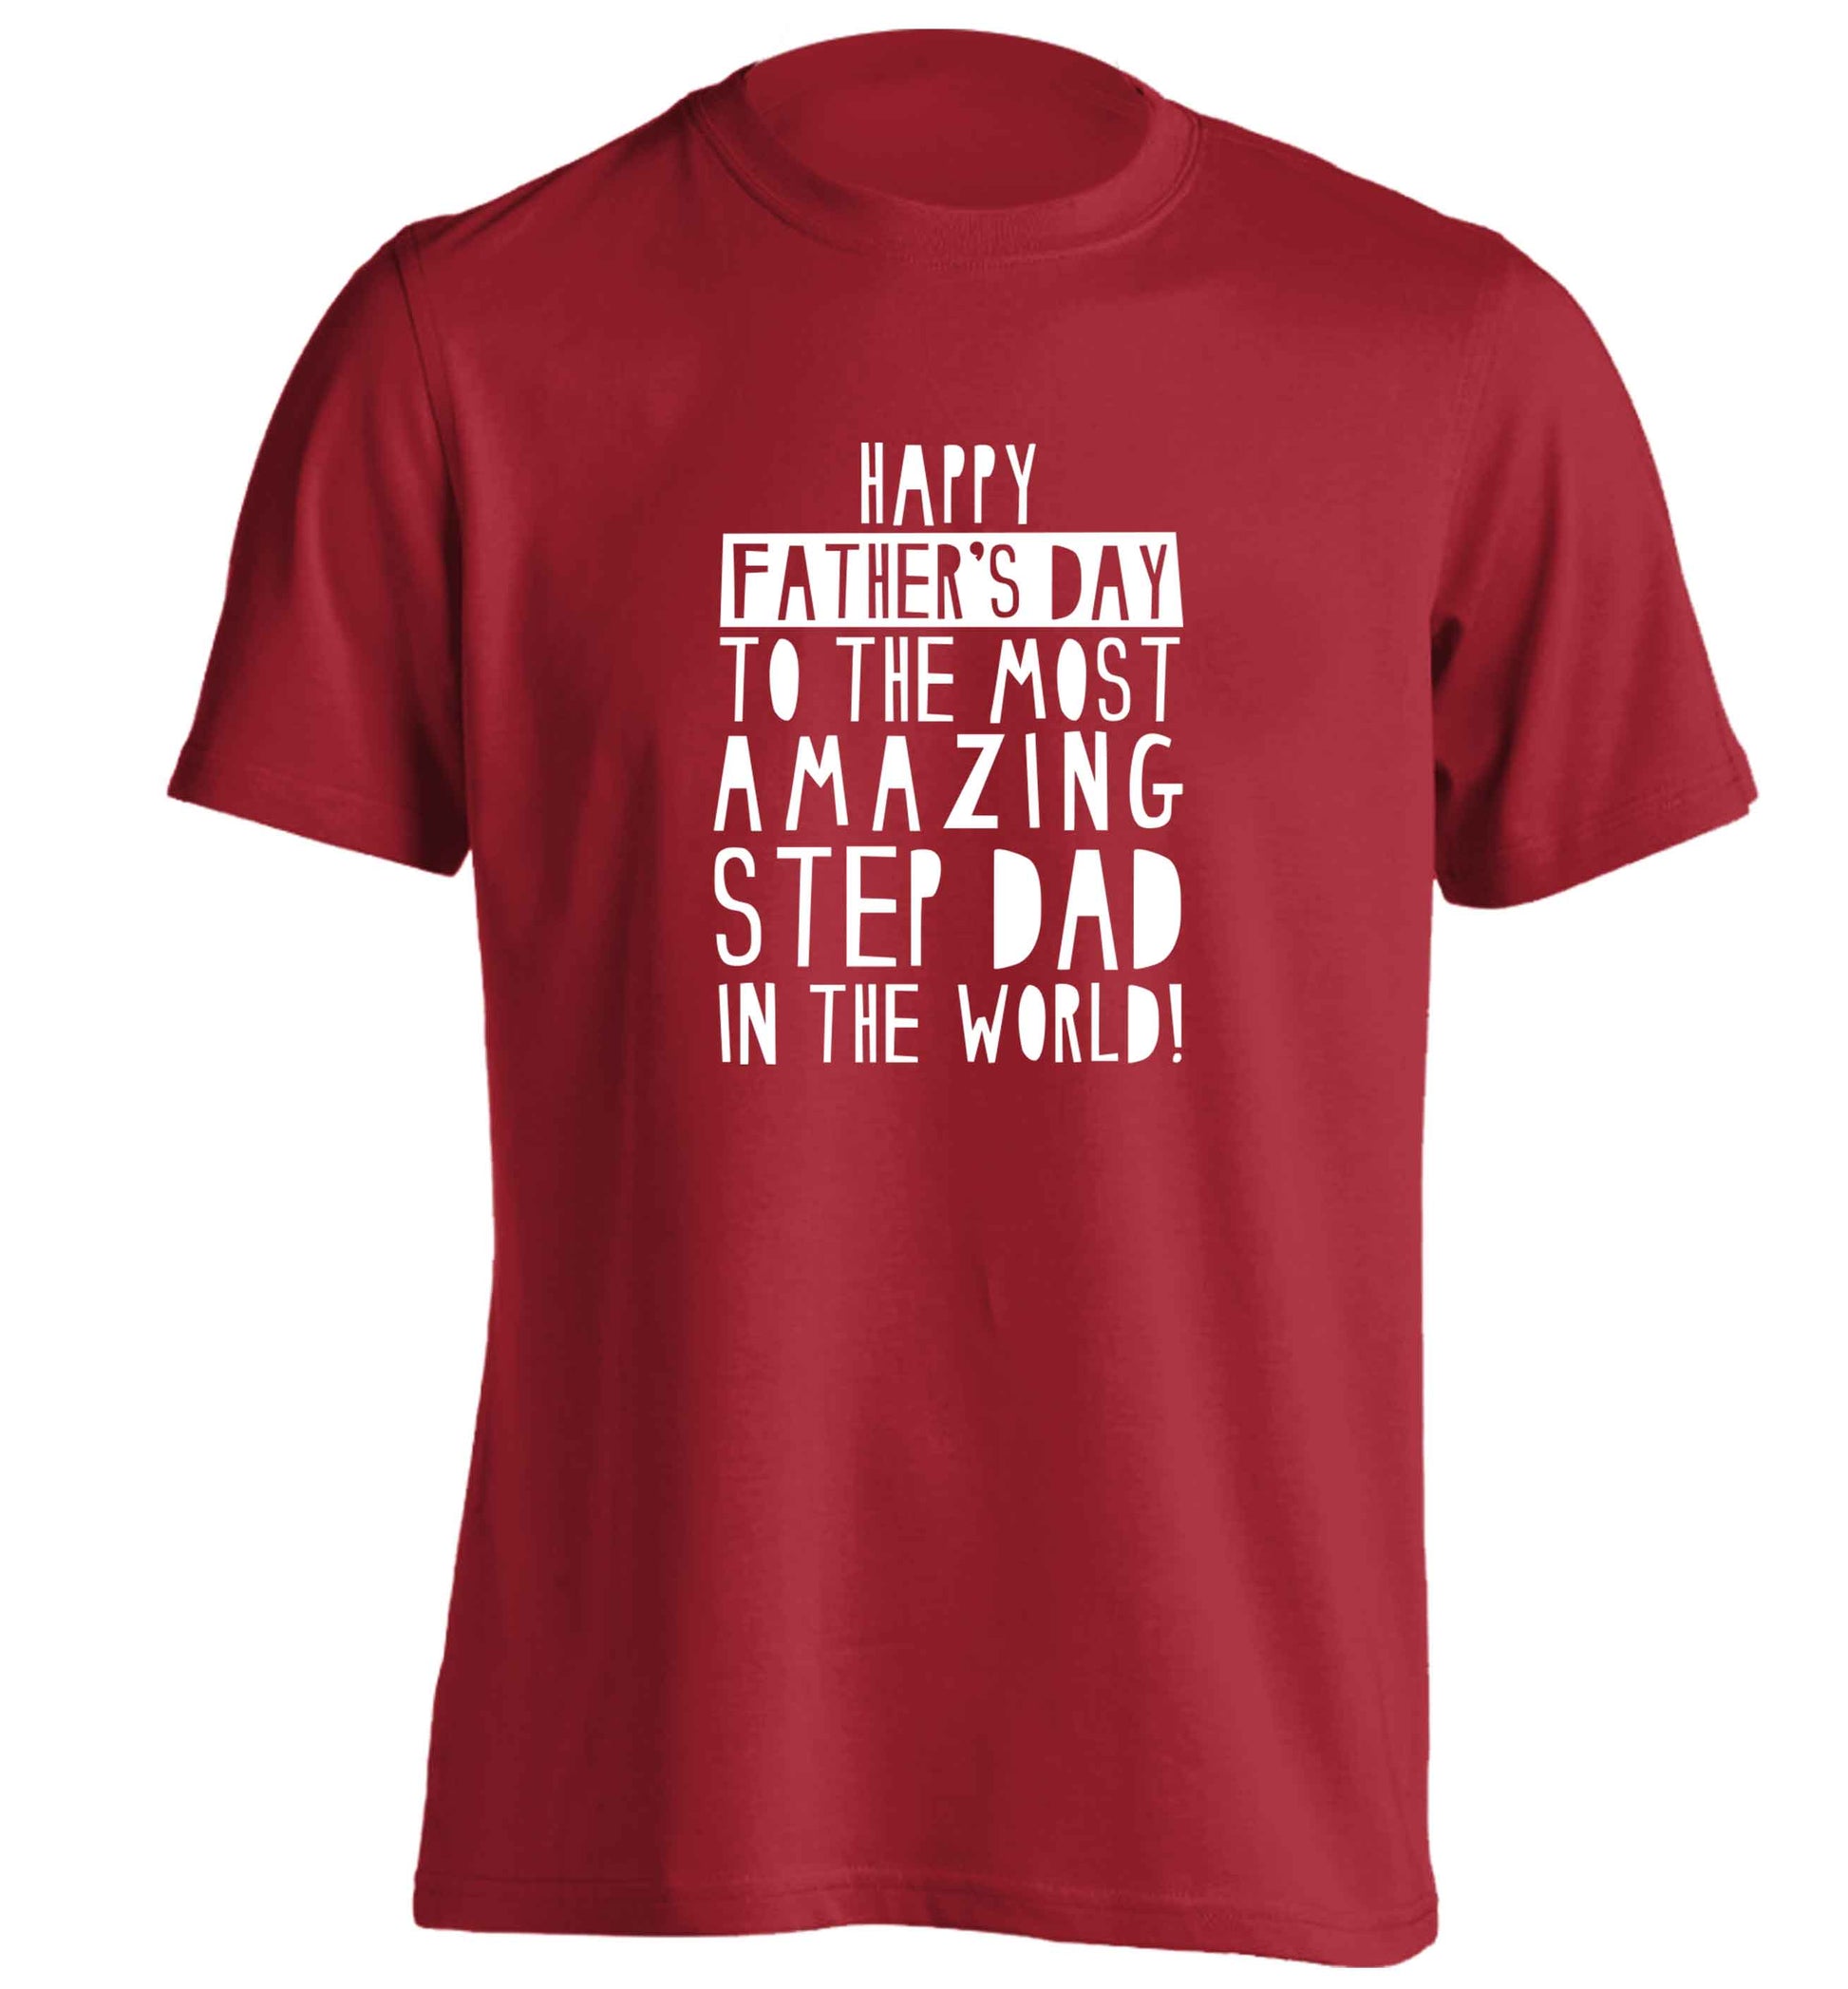 Happy Father's day to the best step dad in the world adults unisex red Tshirt 2XL